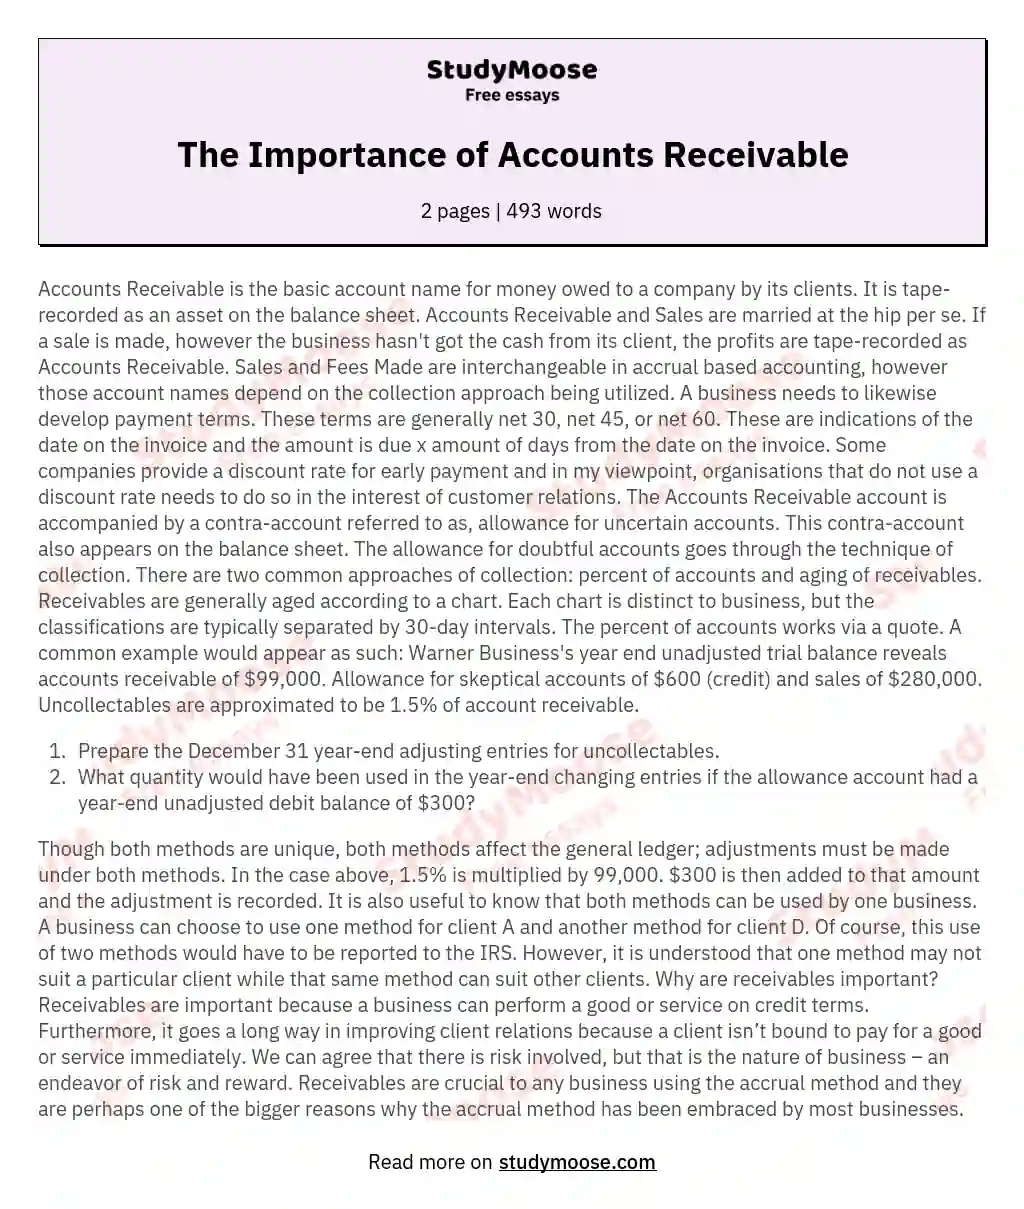 The Importance of Accounts Receivable essay